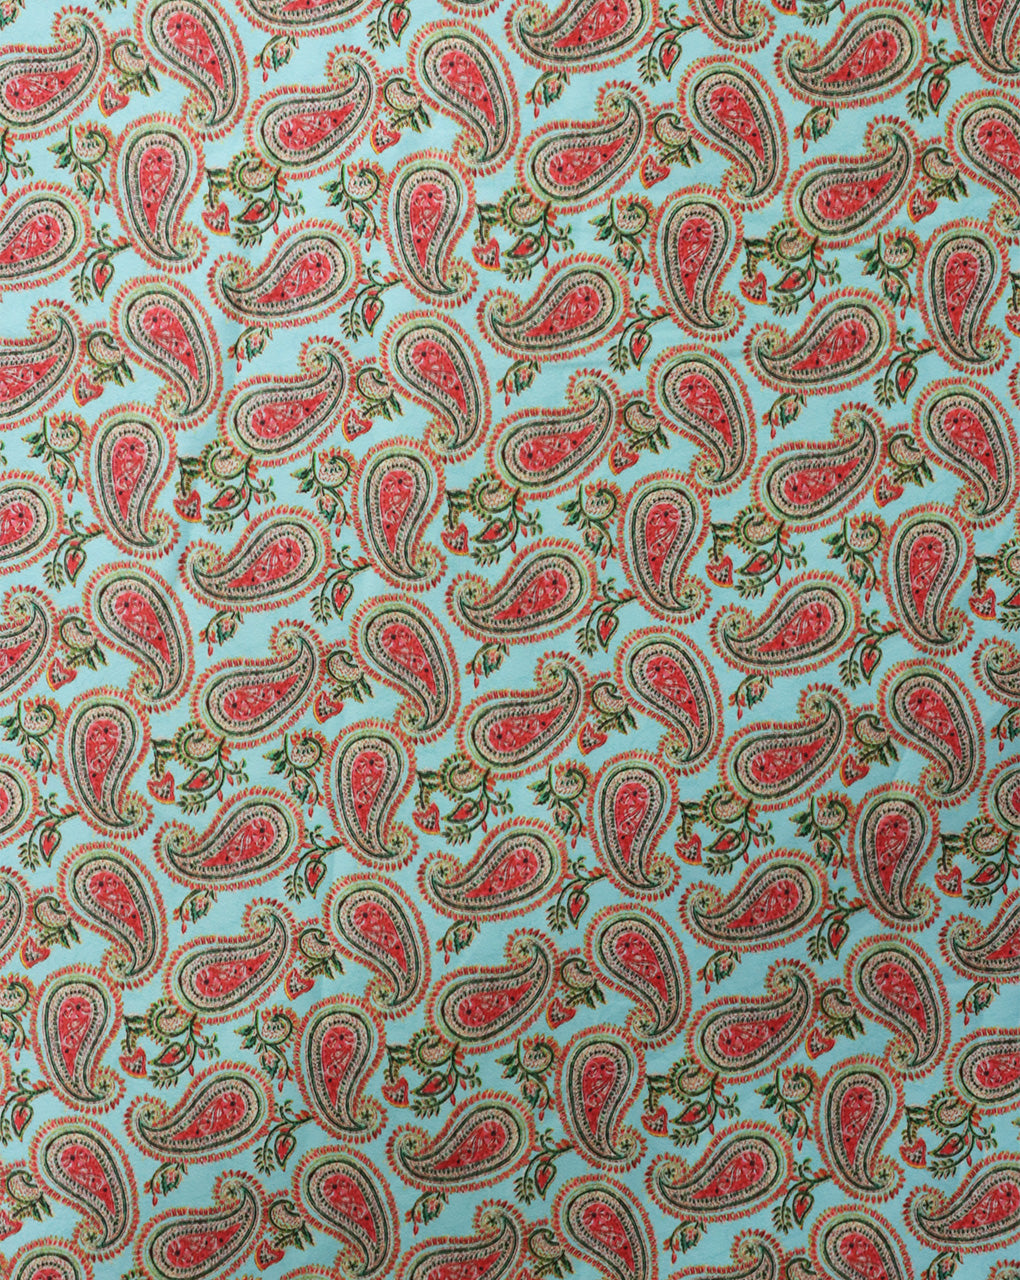 PAISLEY DESIGN DIGITAL PRINTED FABRIC (WIDTH-56 INCHES)